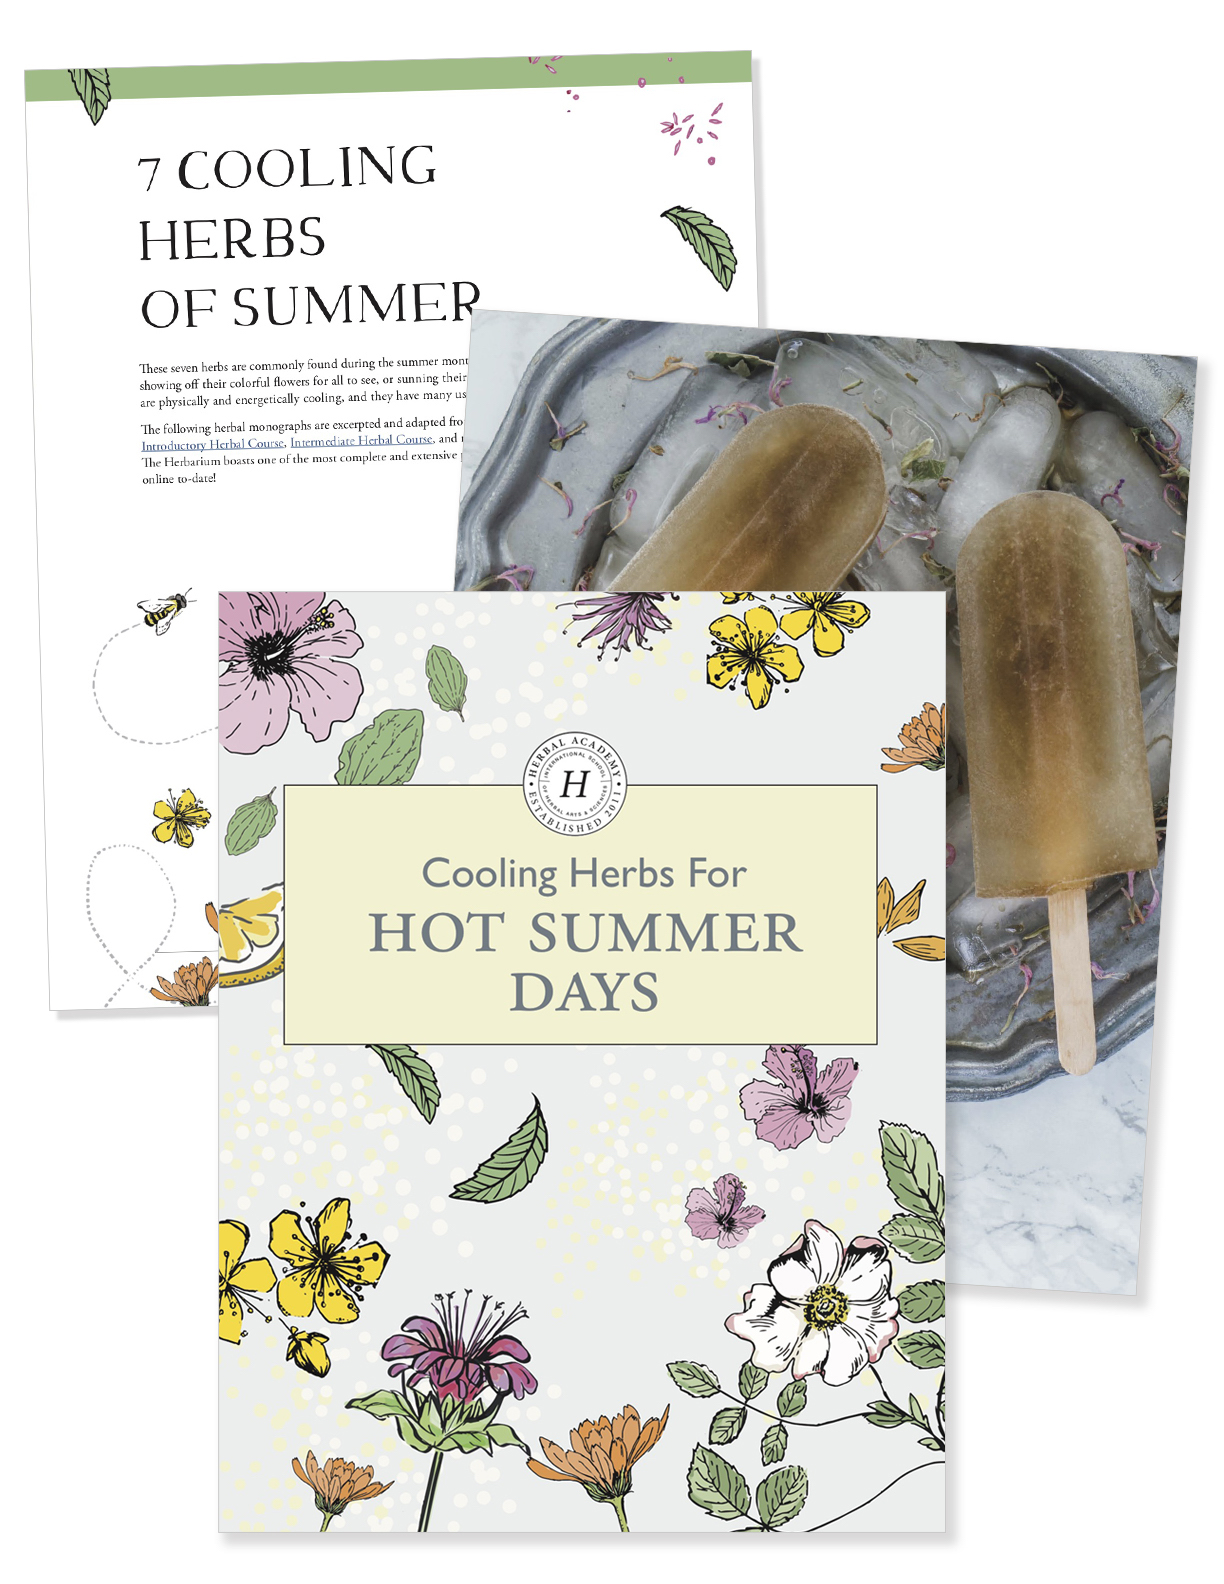 New eBook! Cooling Herbs for Hot Summer Days | Herbal Academy | Herbal Academy's free ebook features plant monographs and simple recipes for seven of the most widely available, cooling herbs of summer.